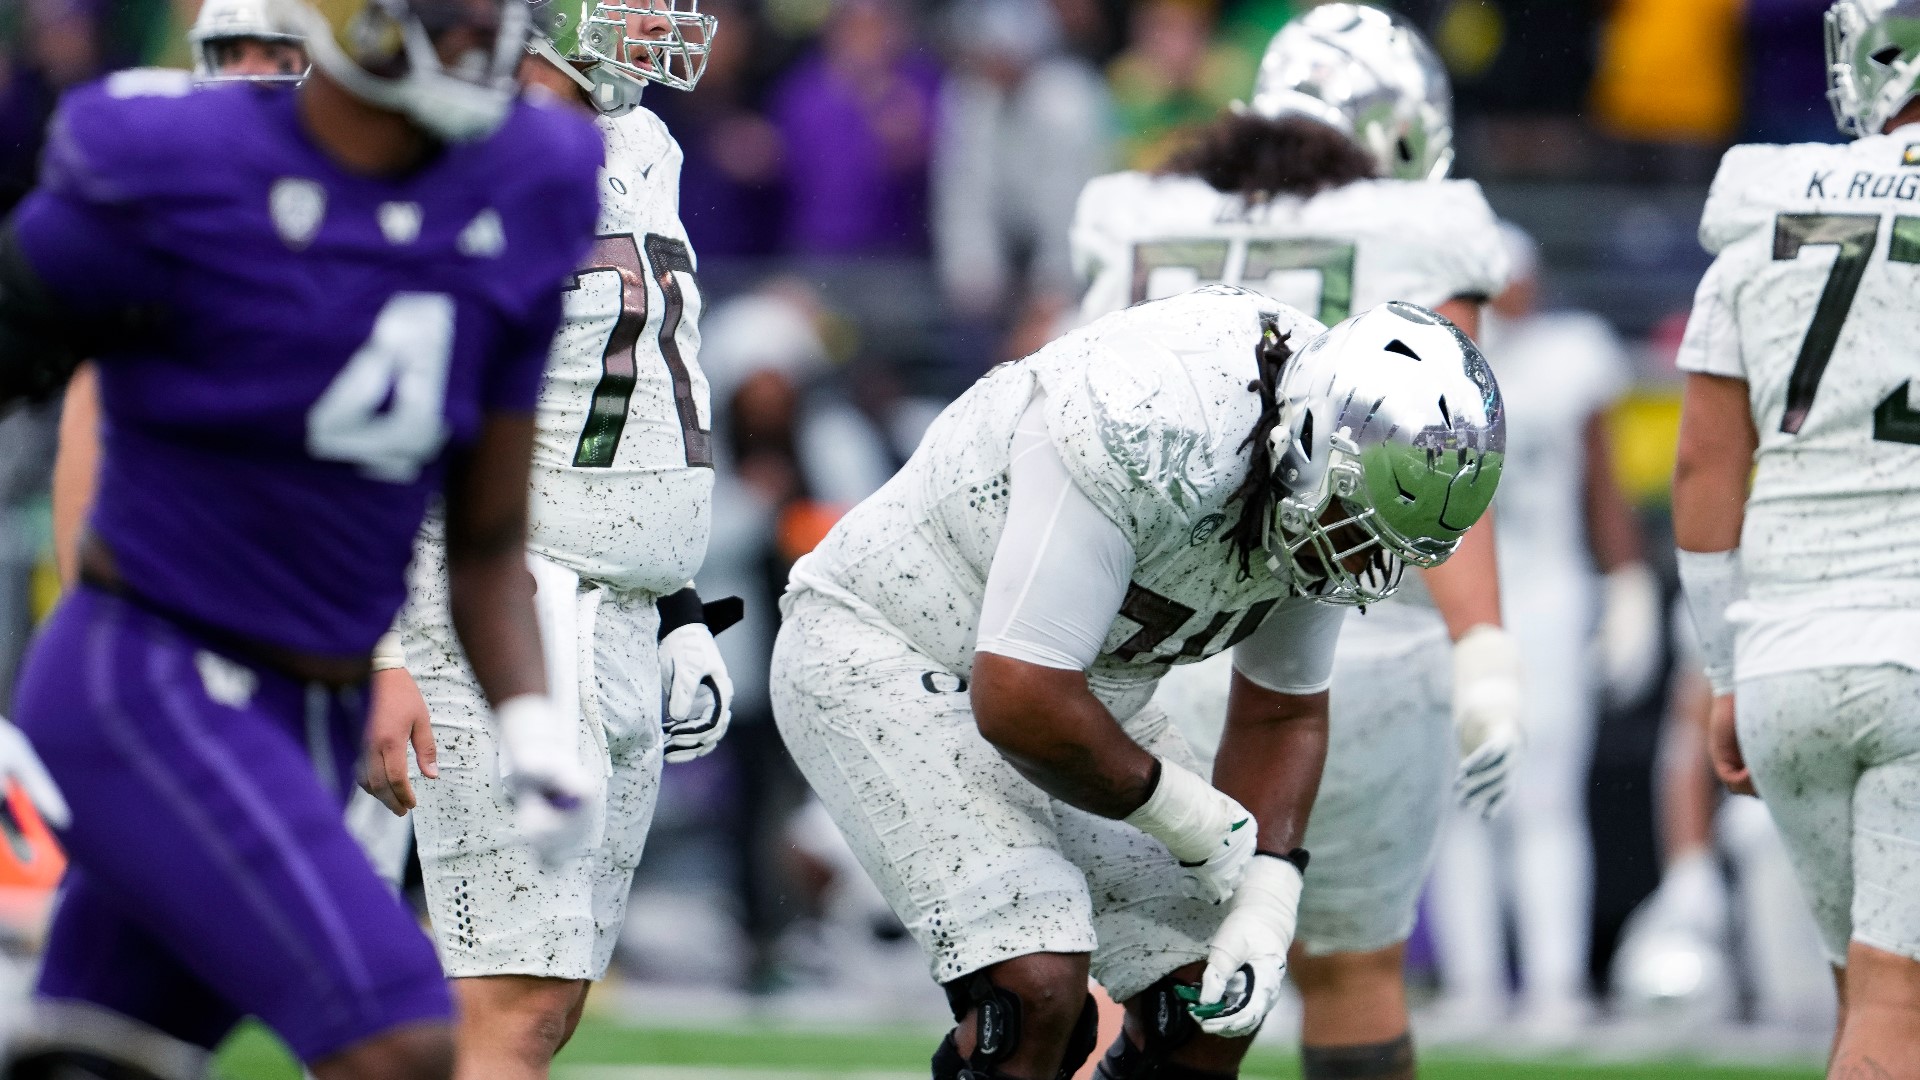 Diving into all things college football, notable moments during the Oregon Ducks and Washington Huskies game, and UCLA and Beavers game.